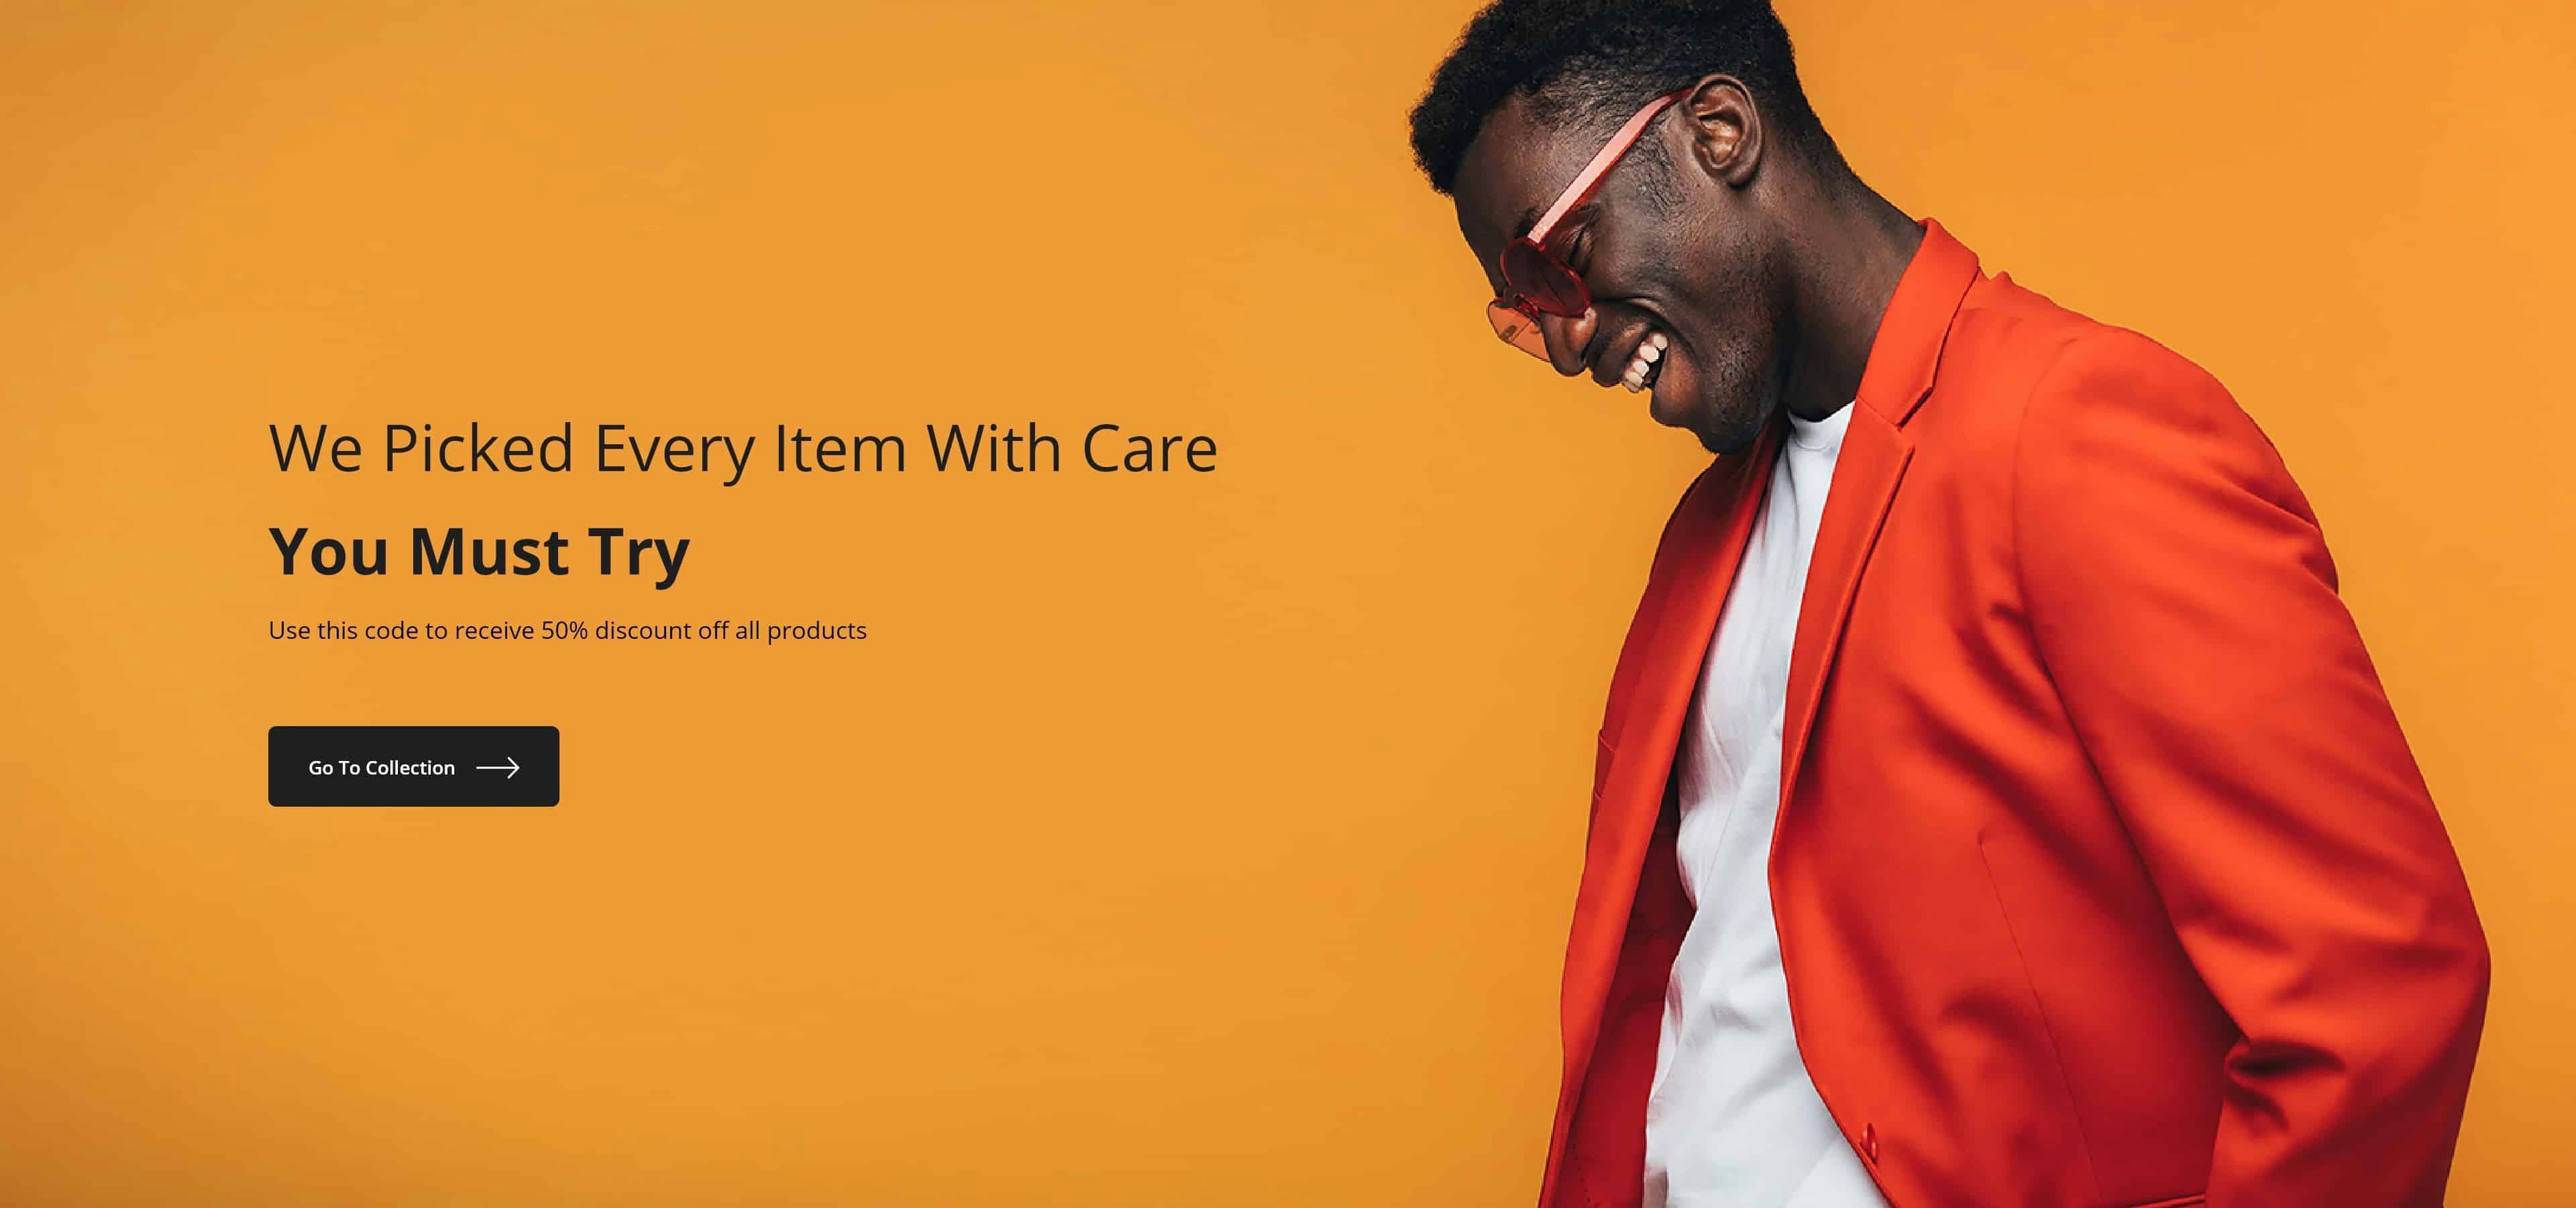 We picked every item with care you must try